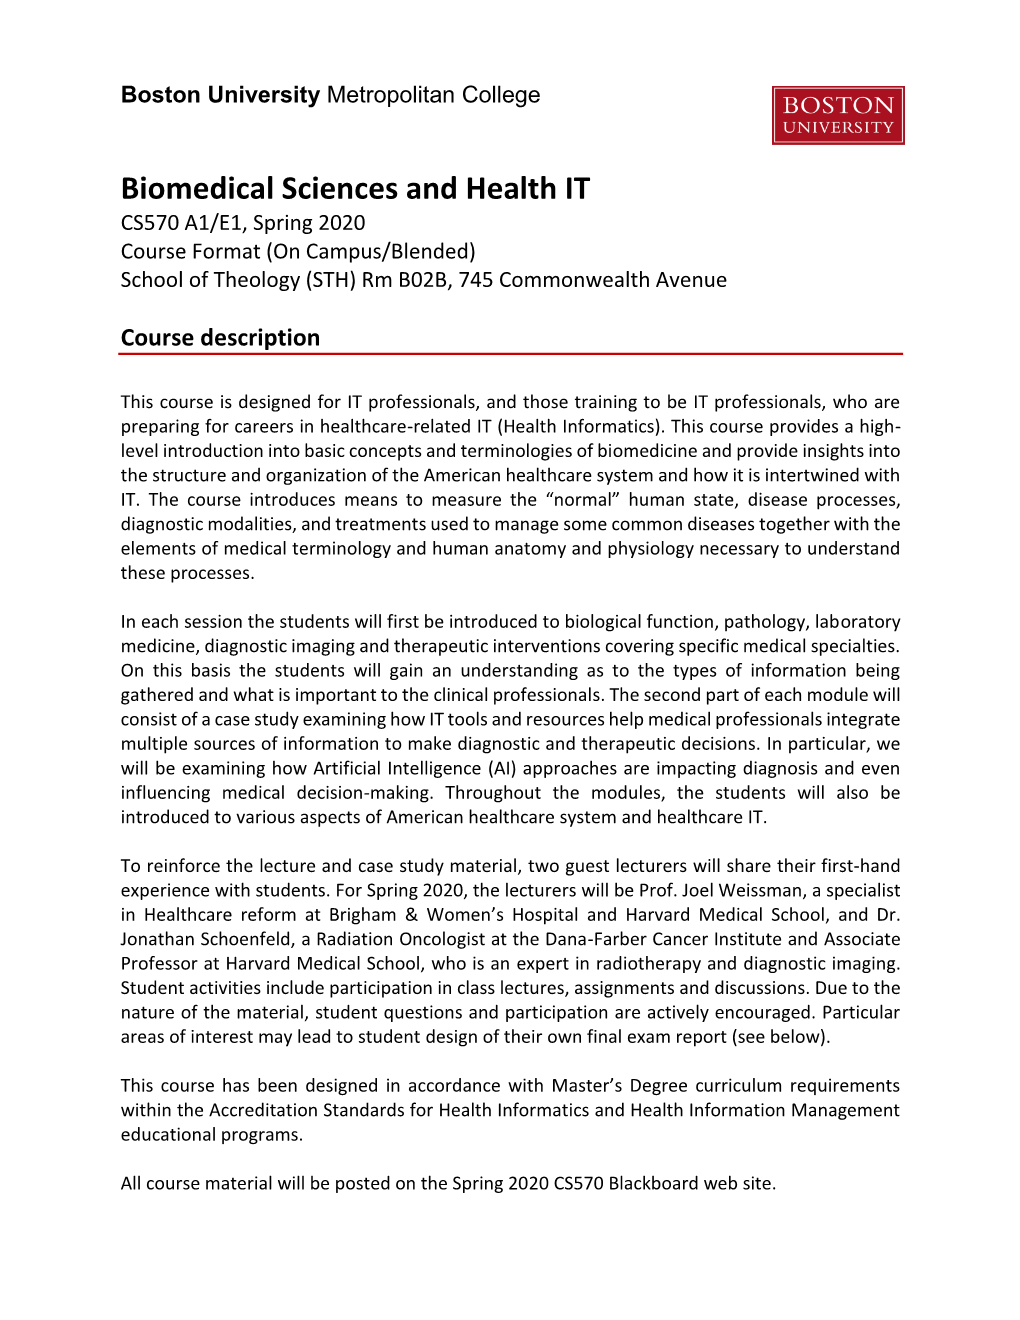 Biomedical Sciences and Health IT CS570 A1/E1, Spring 2020 Course Format (On Campus/Blended) School of Theology (STH) Rm B02B, 745 Commonwealth Avenue